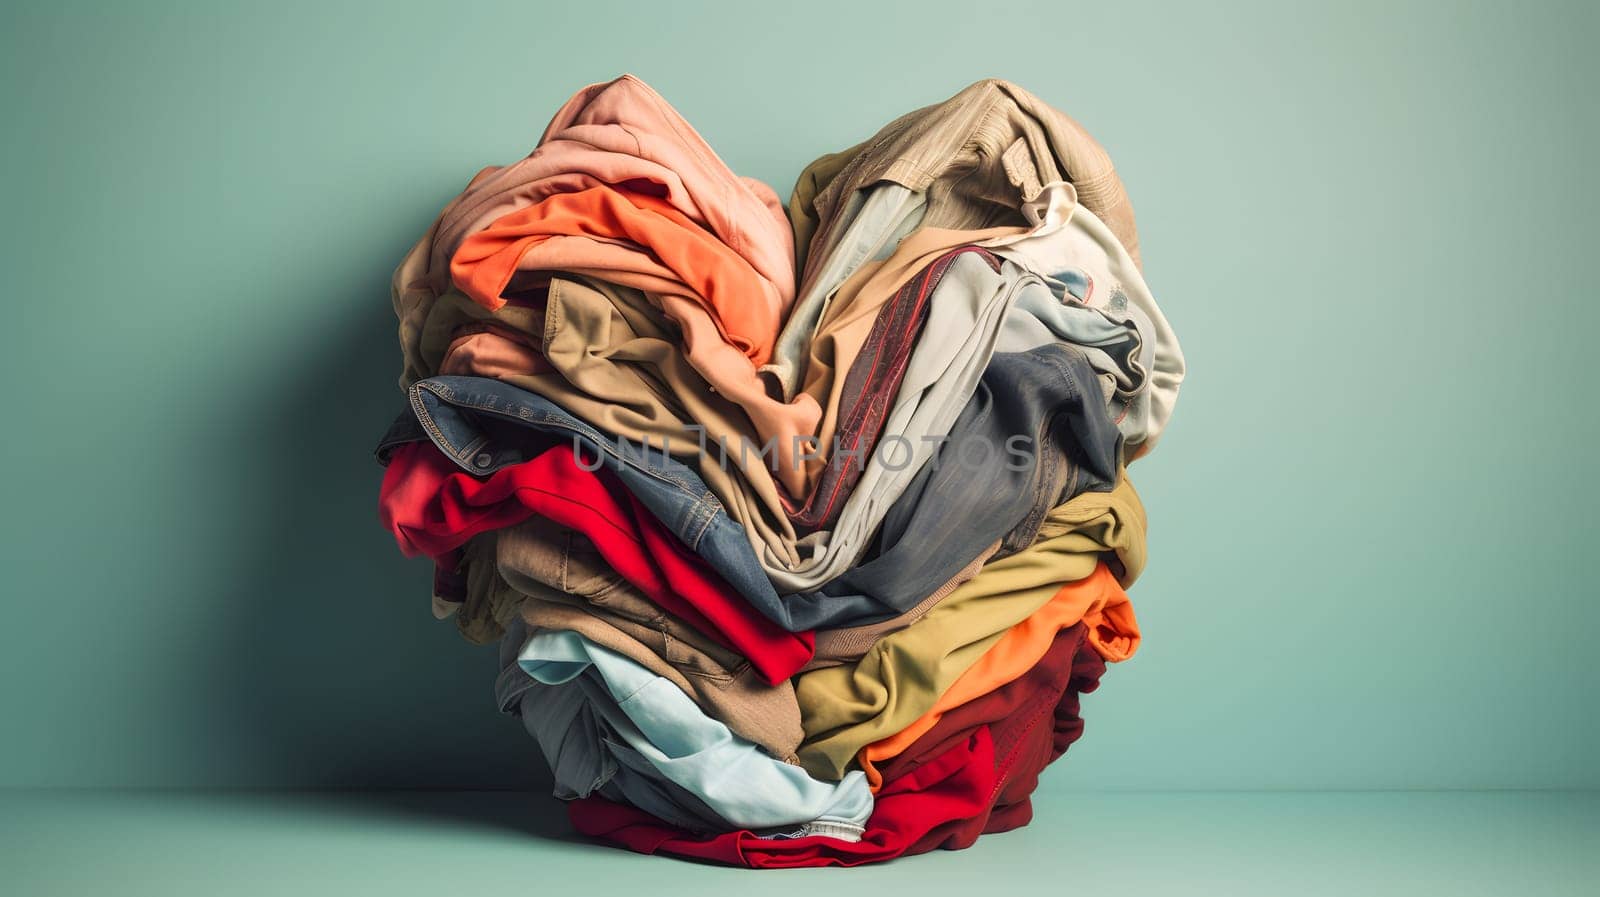 used clothes folded to form a heart on a light green background. Neural network generated in May 2023. Not based on any actual person, scene or pattern.